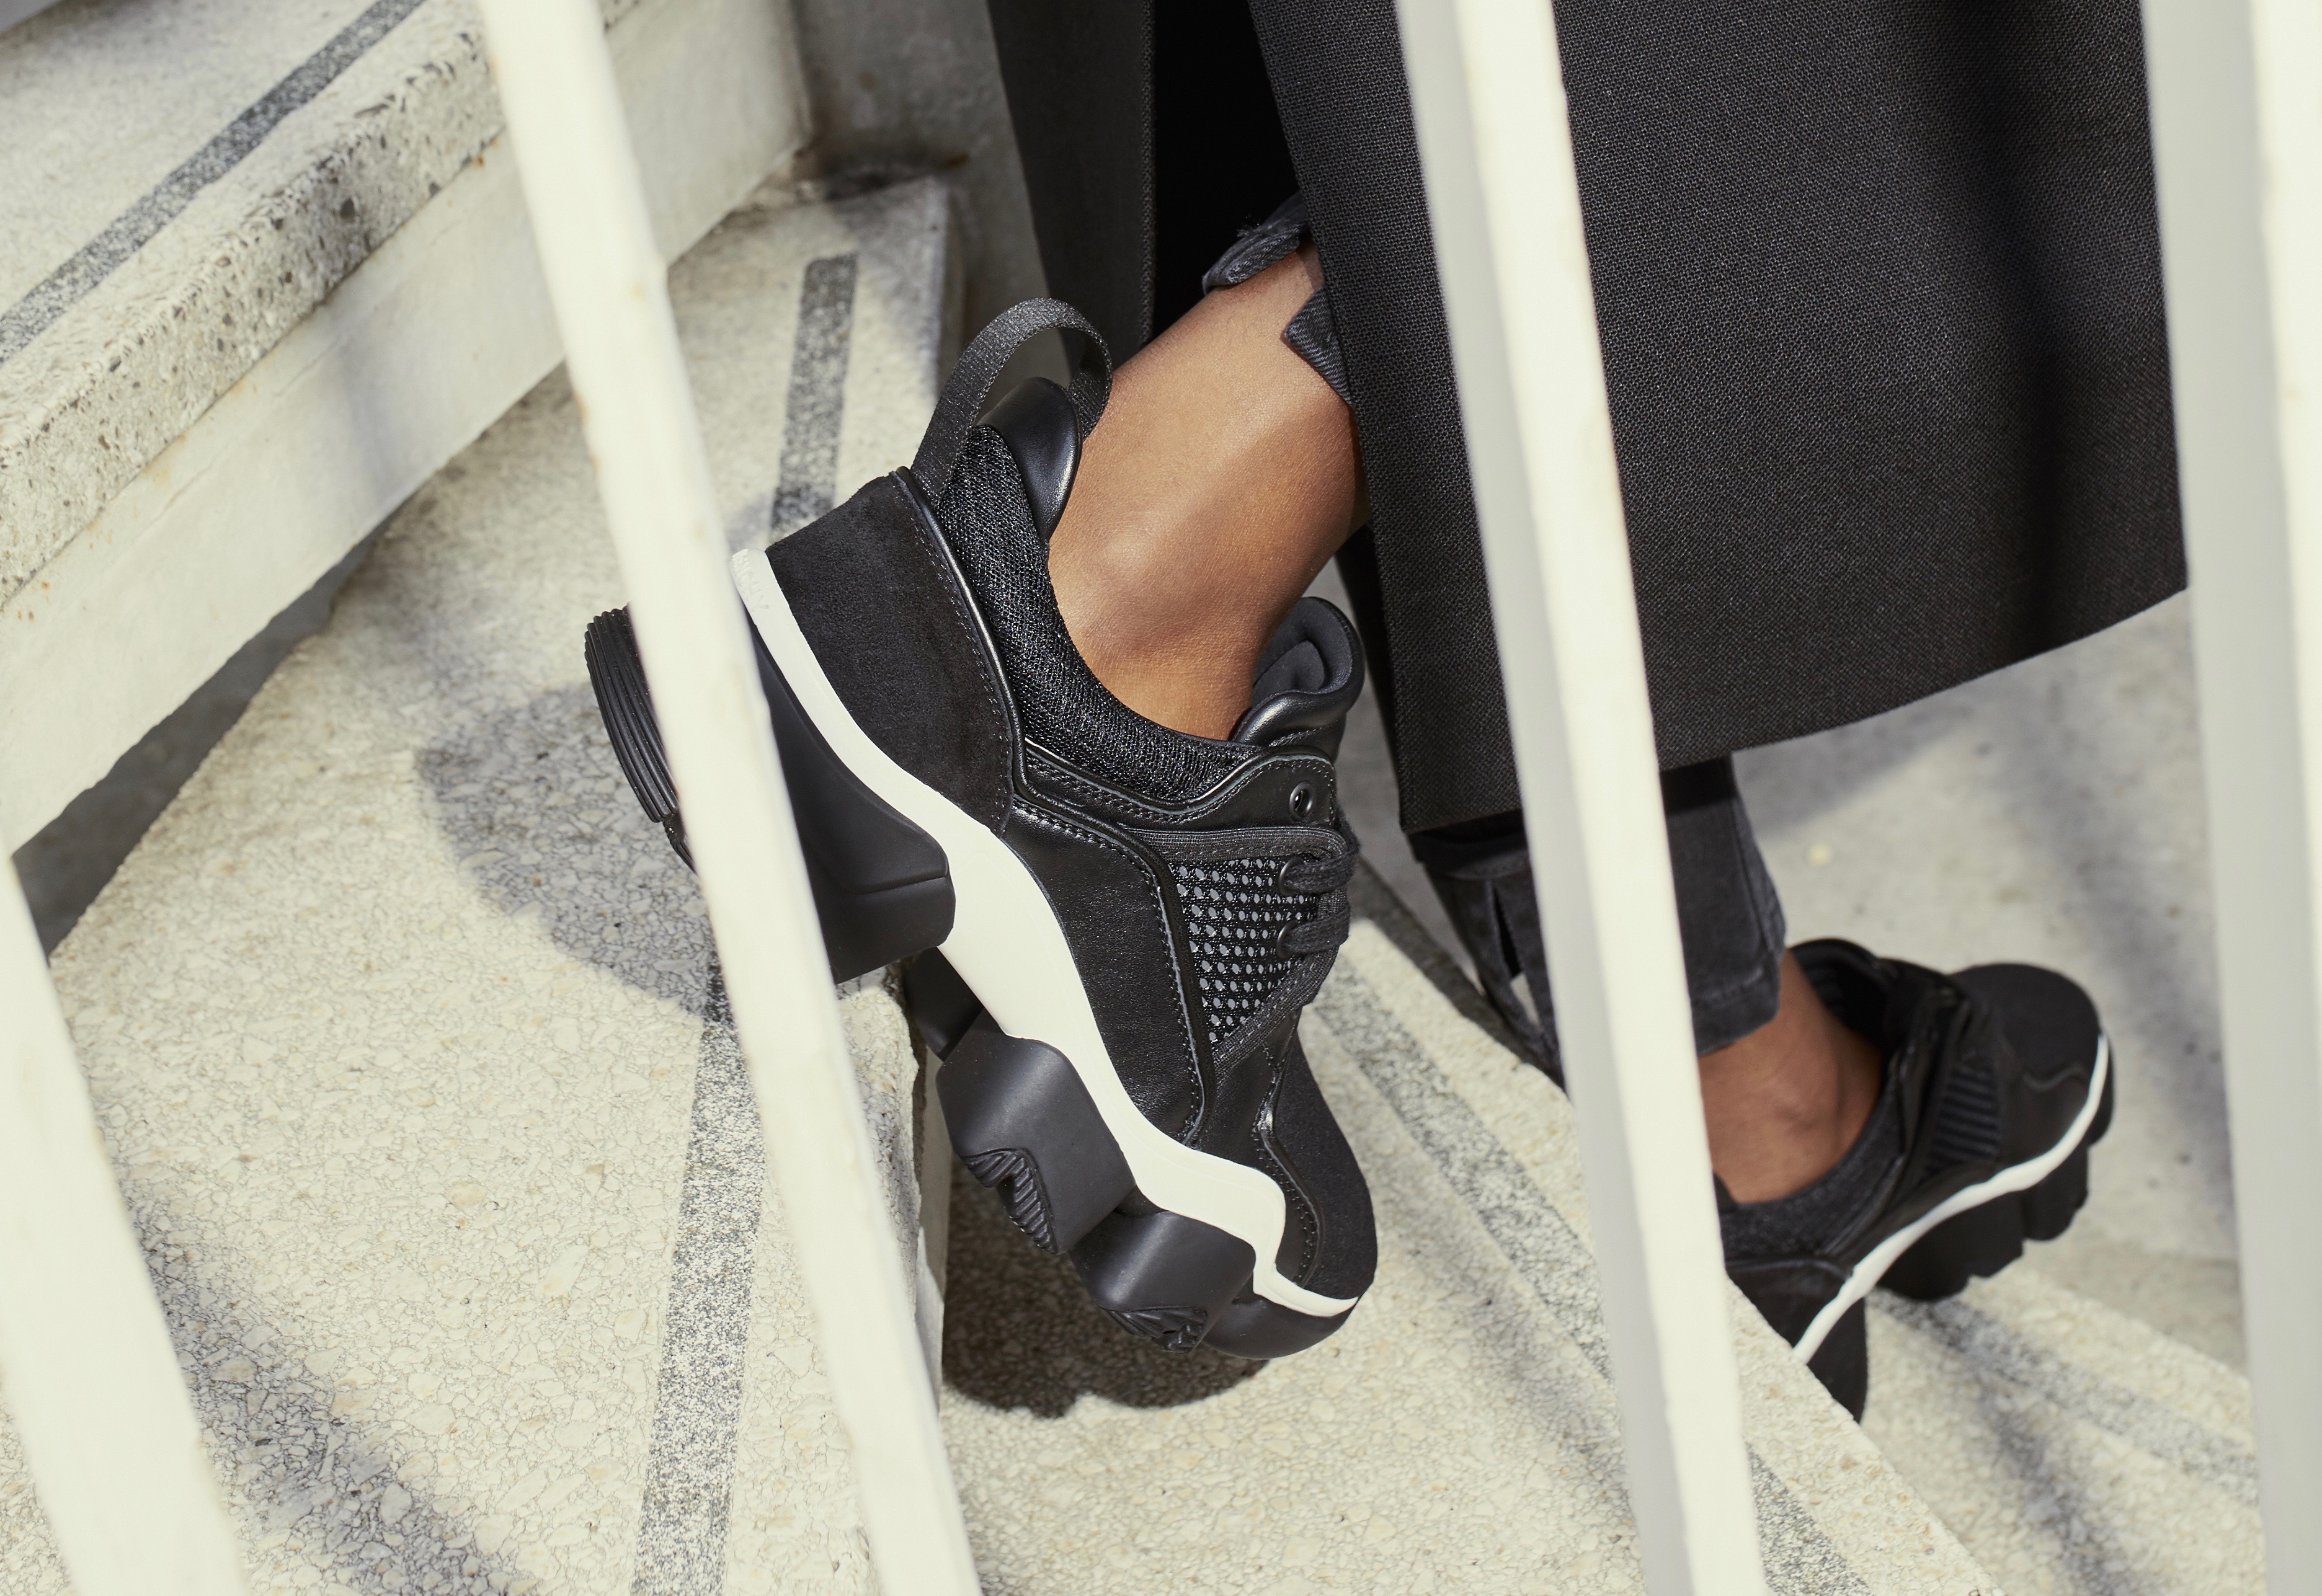 Givenchy's Jaw Sneakers are Now 